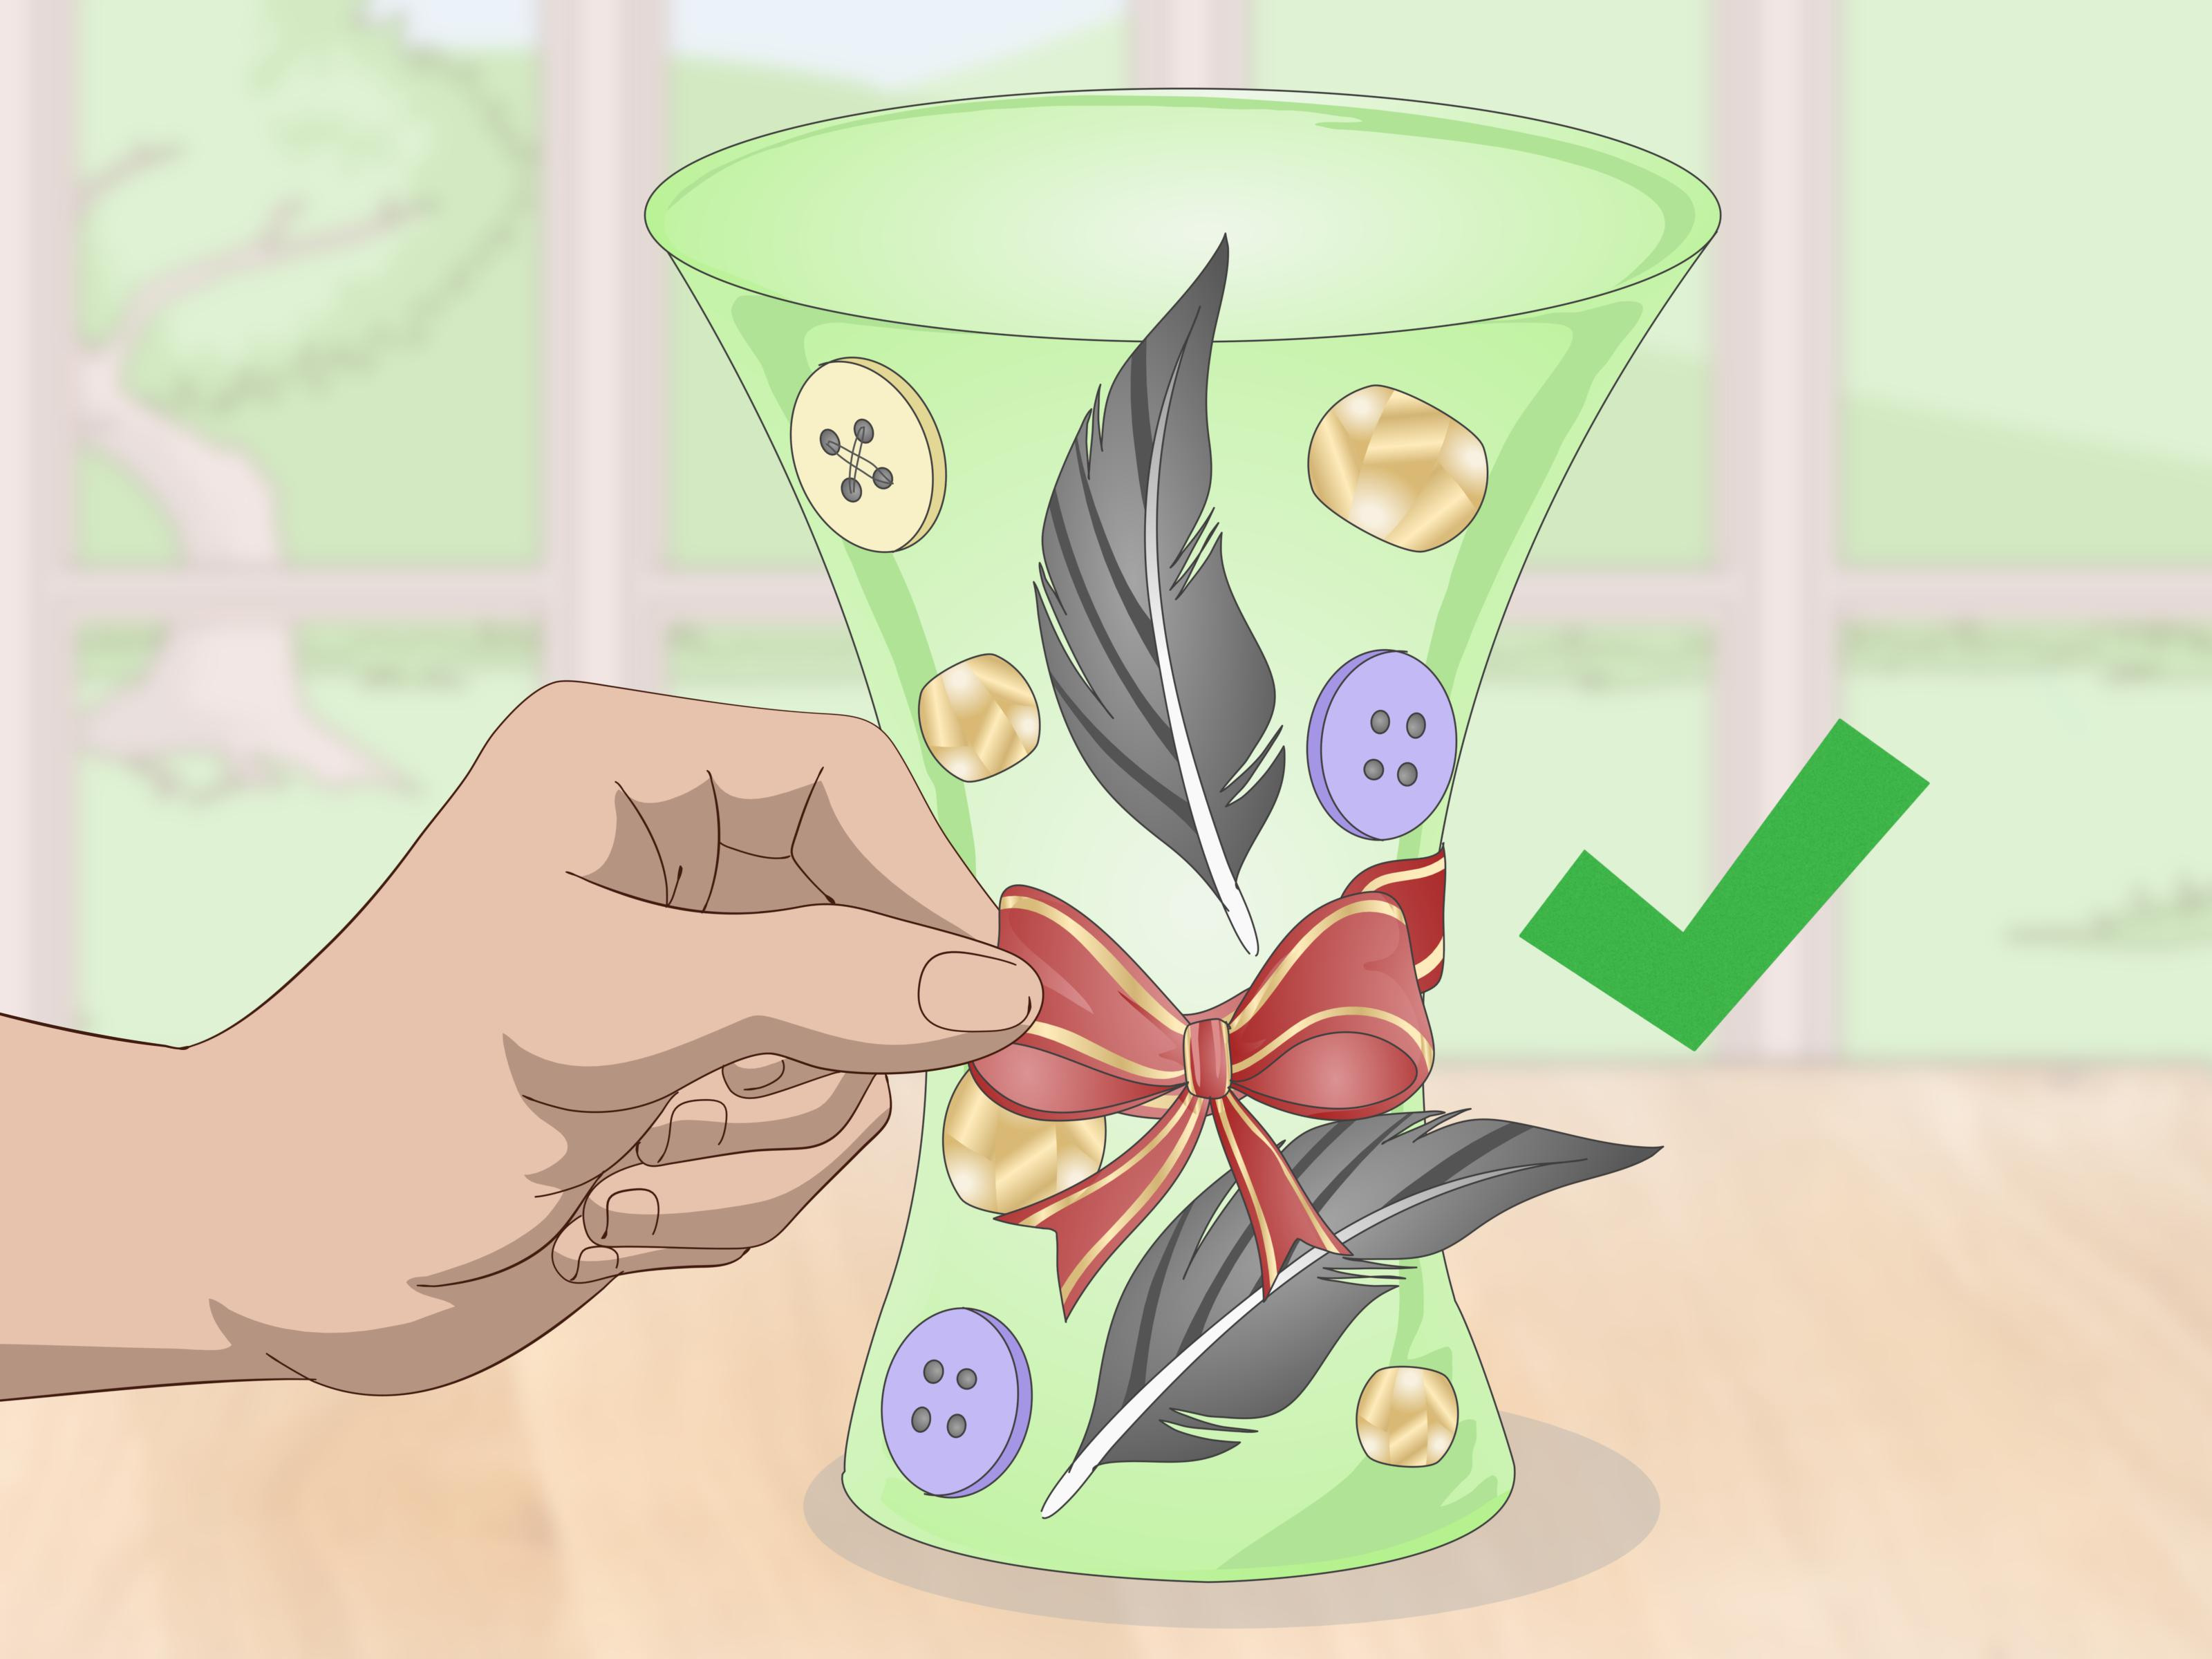 flower vase stones of 3 ways to decorate a flower vase with a ribbon wikihow intended for decorate a flower vase with a ribbon step 14